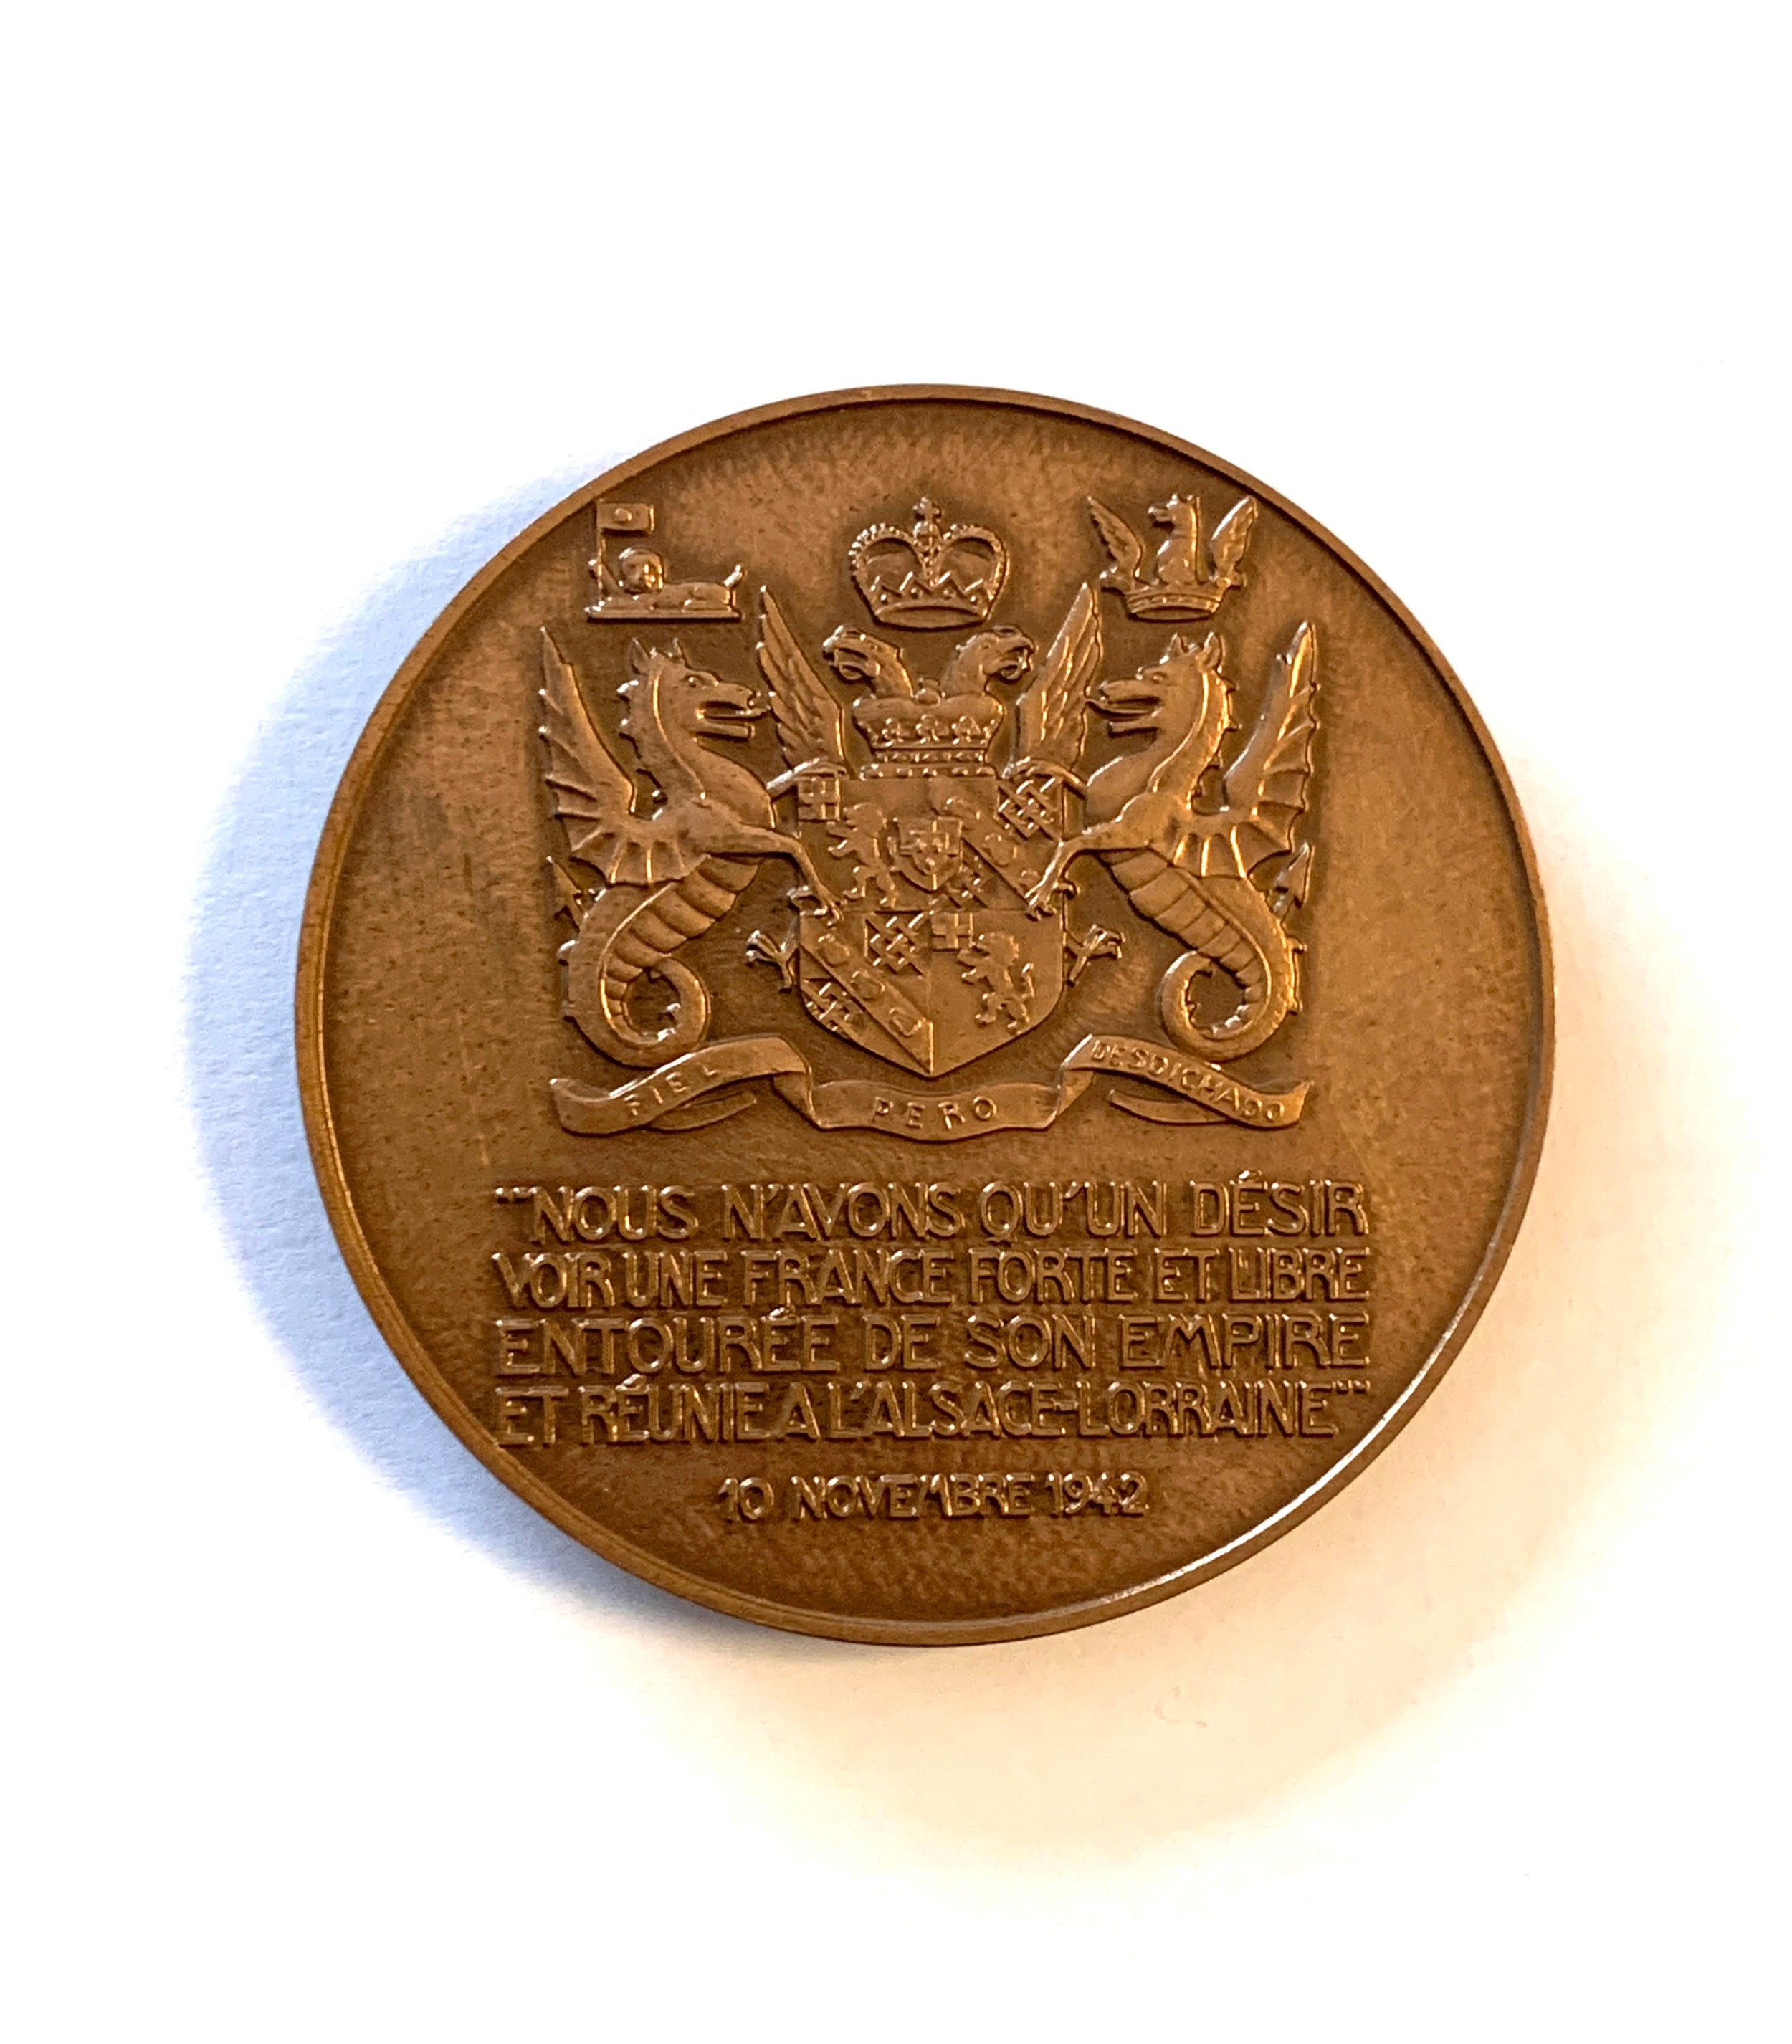 A bronze Winston Churchill medal struck by Pierre Turin in 1945, issued for the liberation of - Image 2 of 3